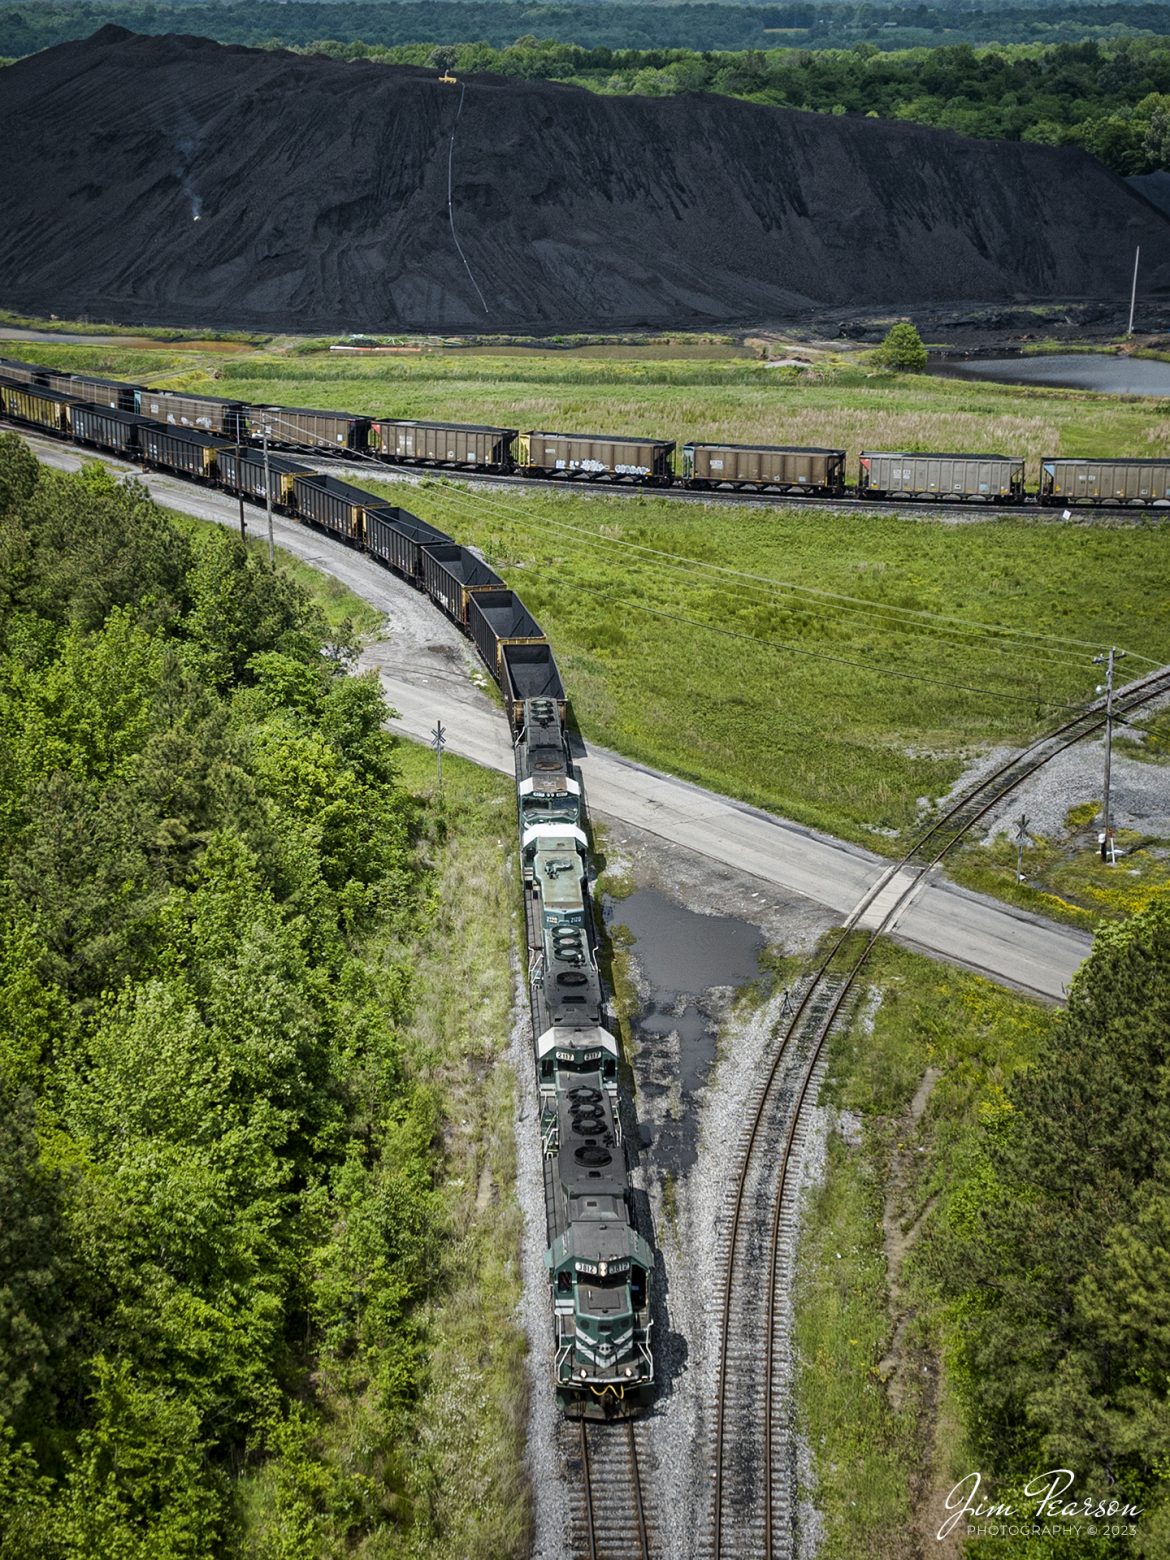 A string of Paducah and Louisville locomotives, with one Evansville Western Railway unit, pulls a long string of empty coal cars out of the loop at the Calvert City Terminal as they prepare to head south to Paducah, Kentucky on May 8th, 2023.

Tech Info: DJI Mavic 3 Classic Drone, RAW, 24mm, f/2.8, 1/1250, ISO 100.

#trainphotography #railroadphotography #trains #railways #dronephotography #trainphotographer #railroadphotographer #jimpearsonphotography #PALtrains #mavic3classic #drones #trainsfromtheair #trainsfromadrone #pal #CCT #emptycoaltrain #calvertcityterminal #kentuckytrains #CalvertCityKy